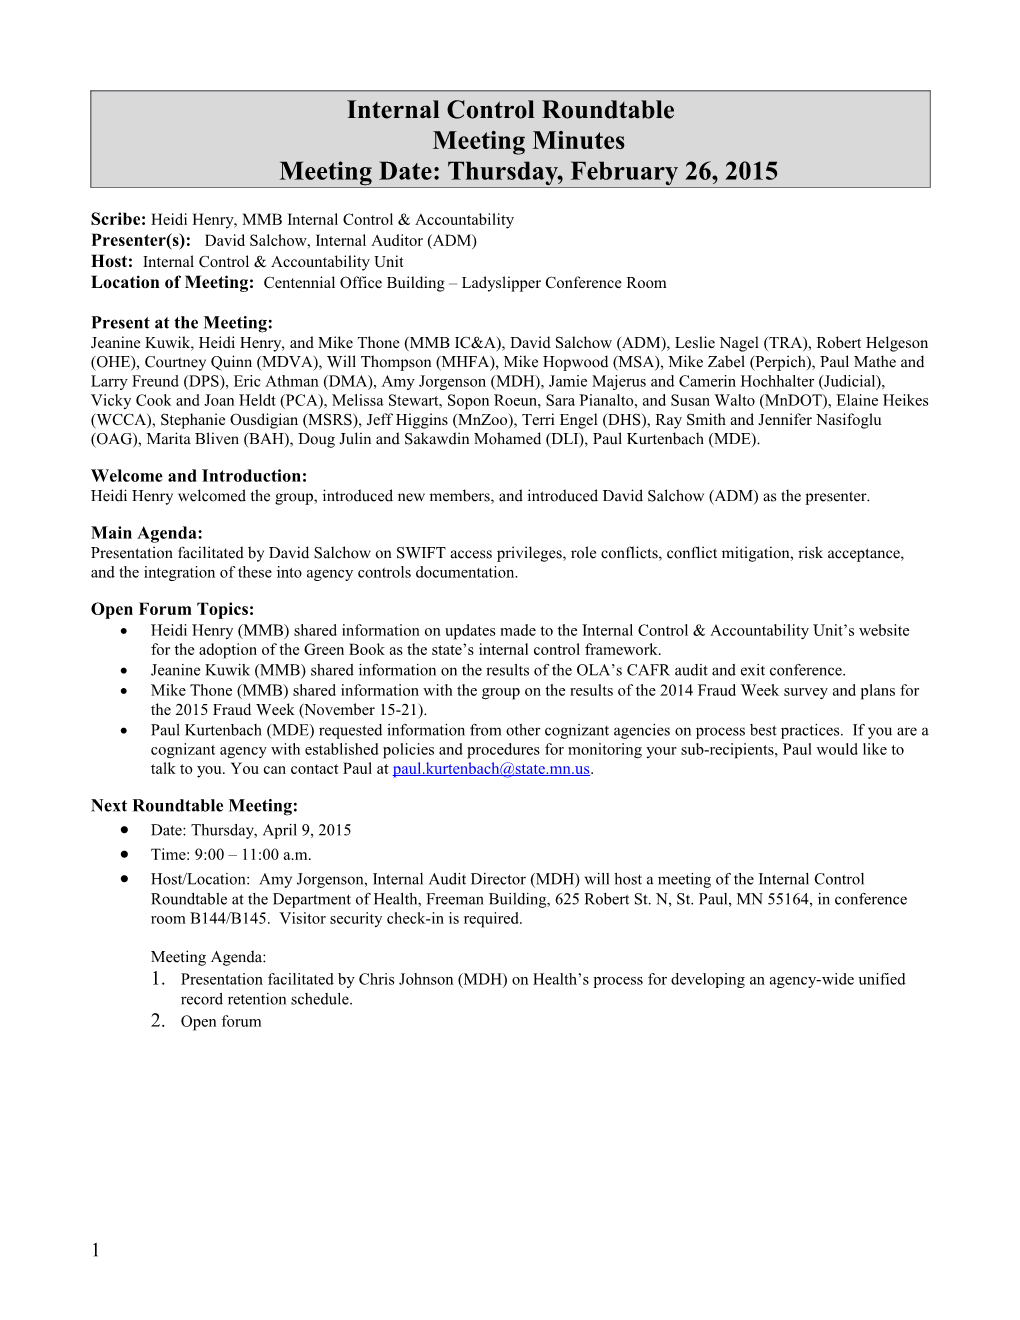 February 26, 2015 Internal Control Roundtable Meeting Minutes